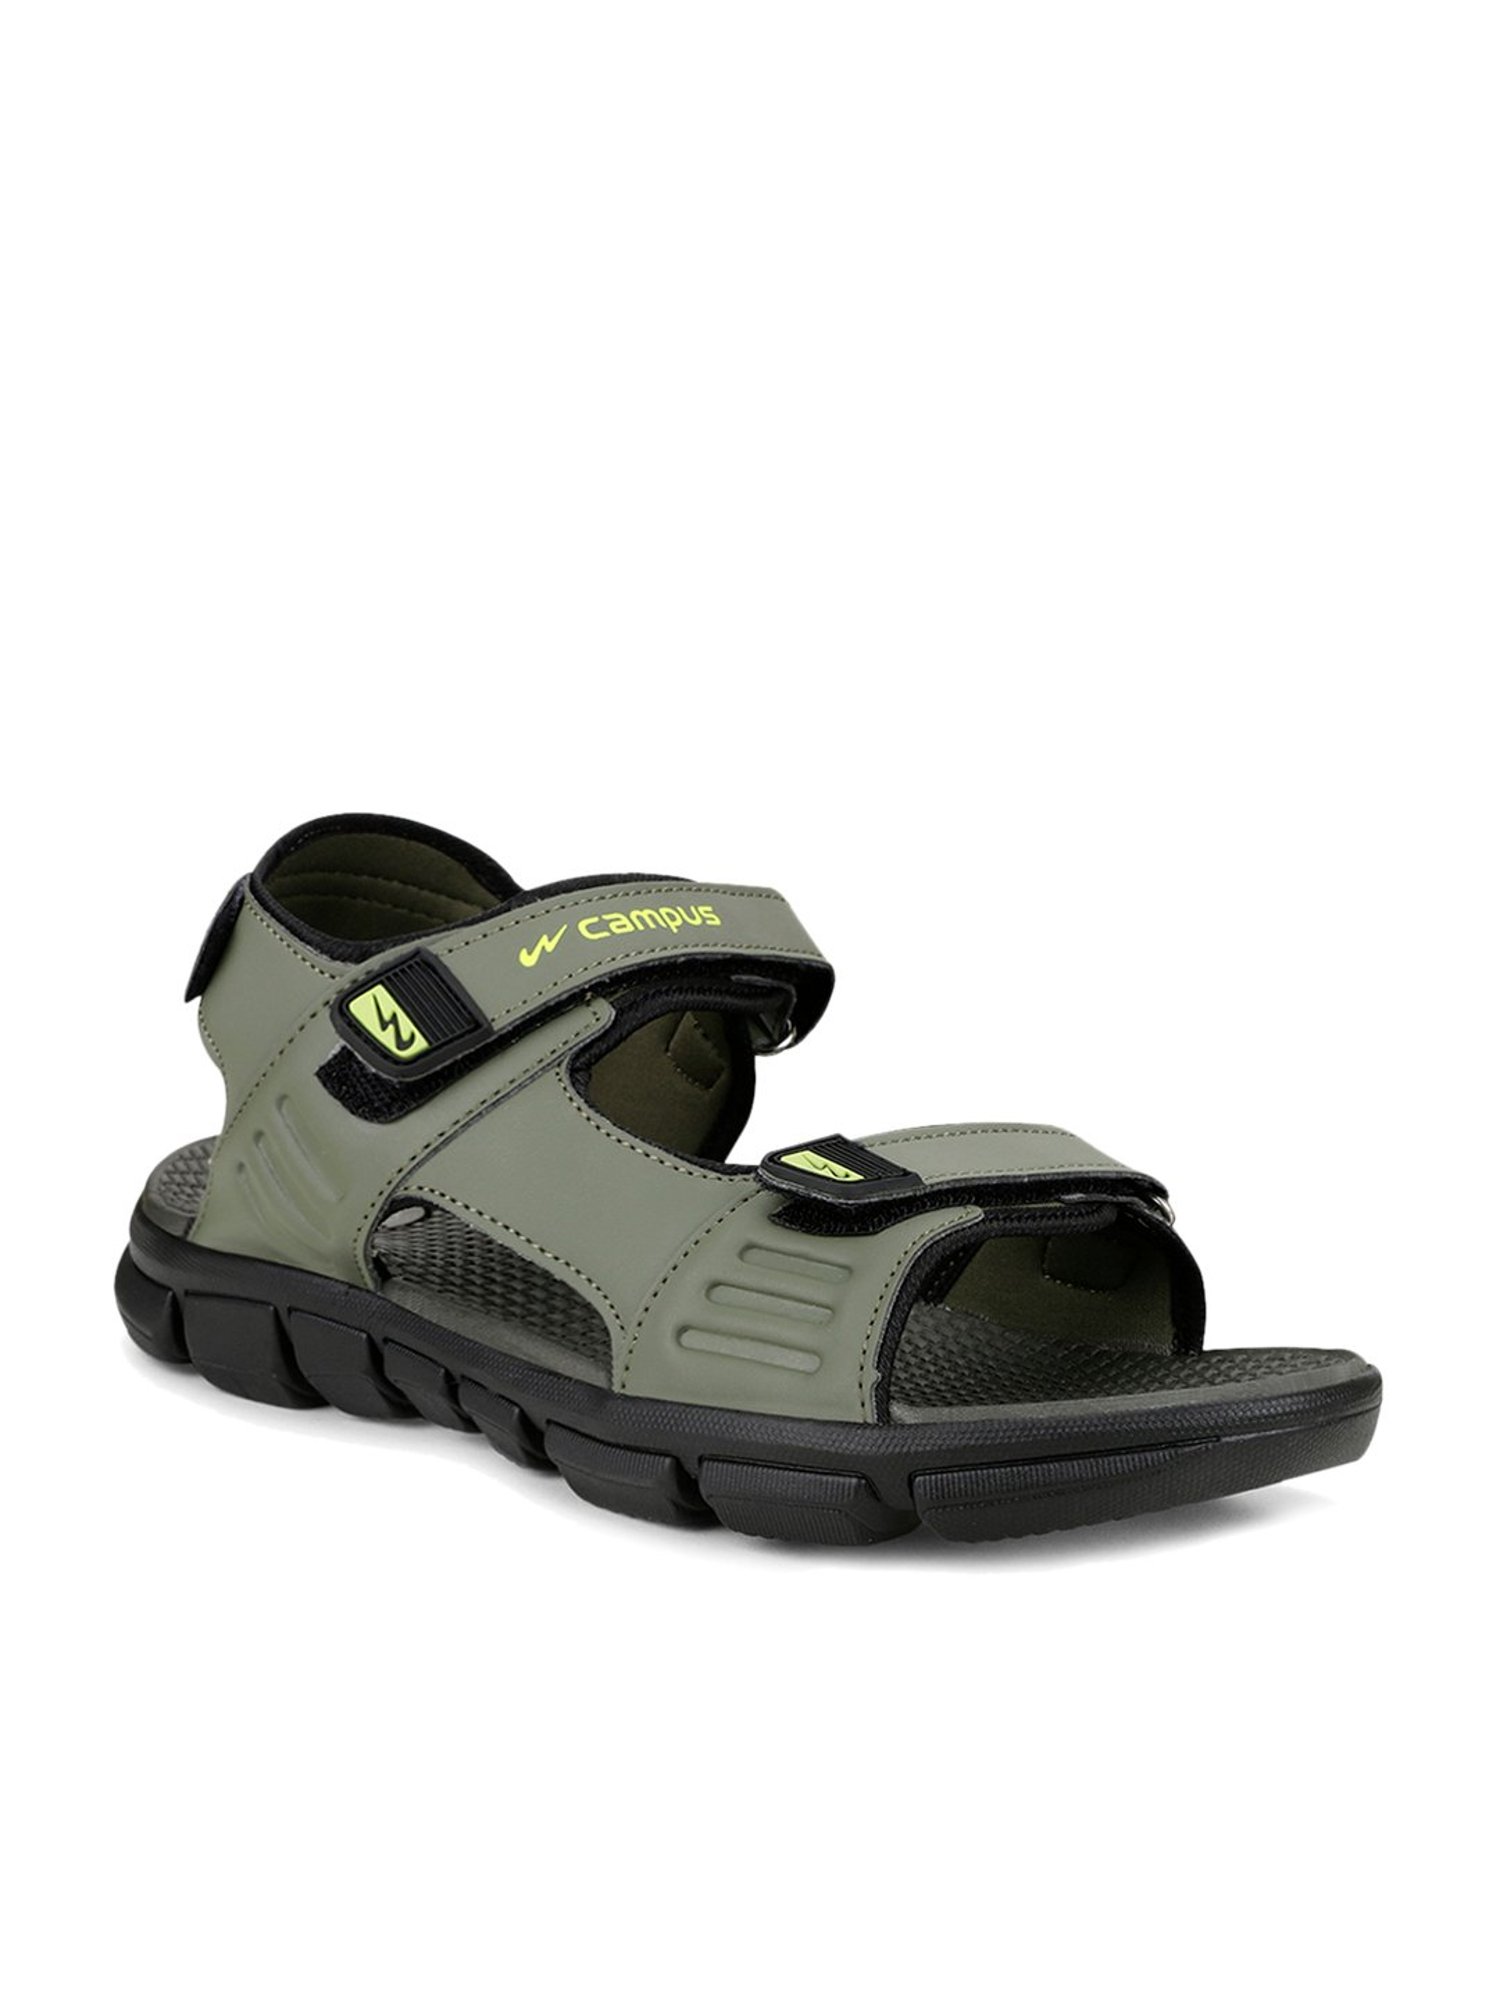 Buy Fsports Mens Black Green Colour Micky Series Synthetic Casual Sandal  6uk Online @ ₹995 from ShopClues